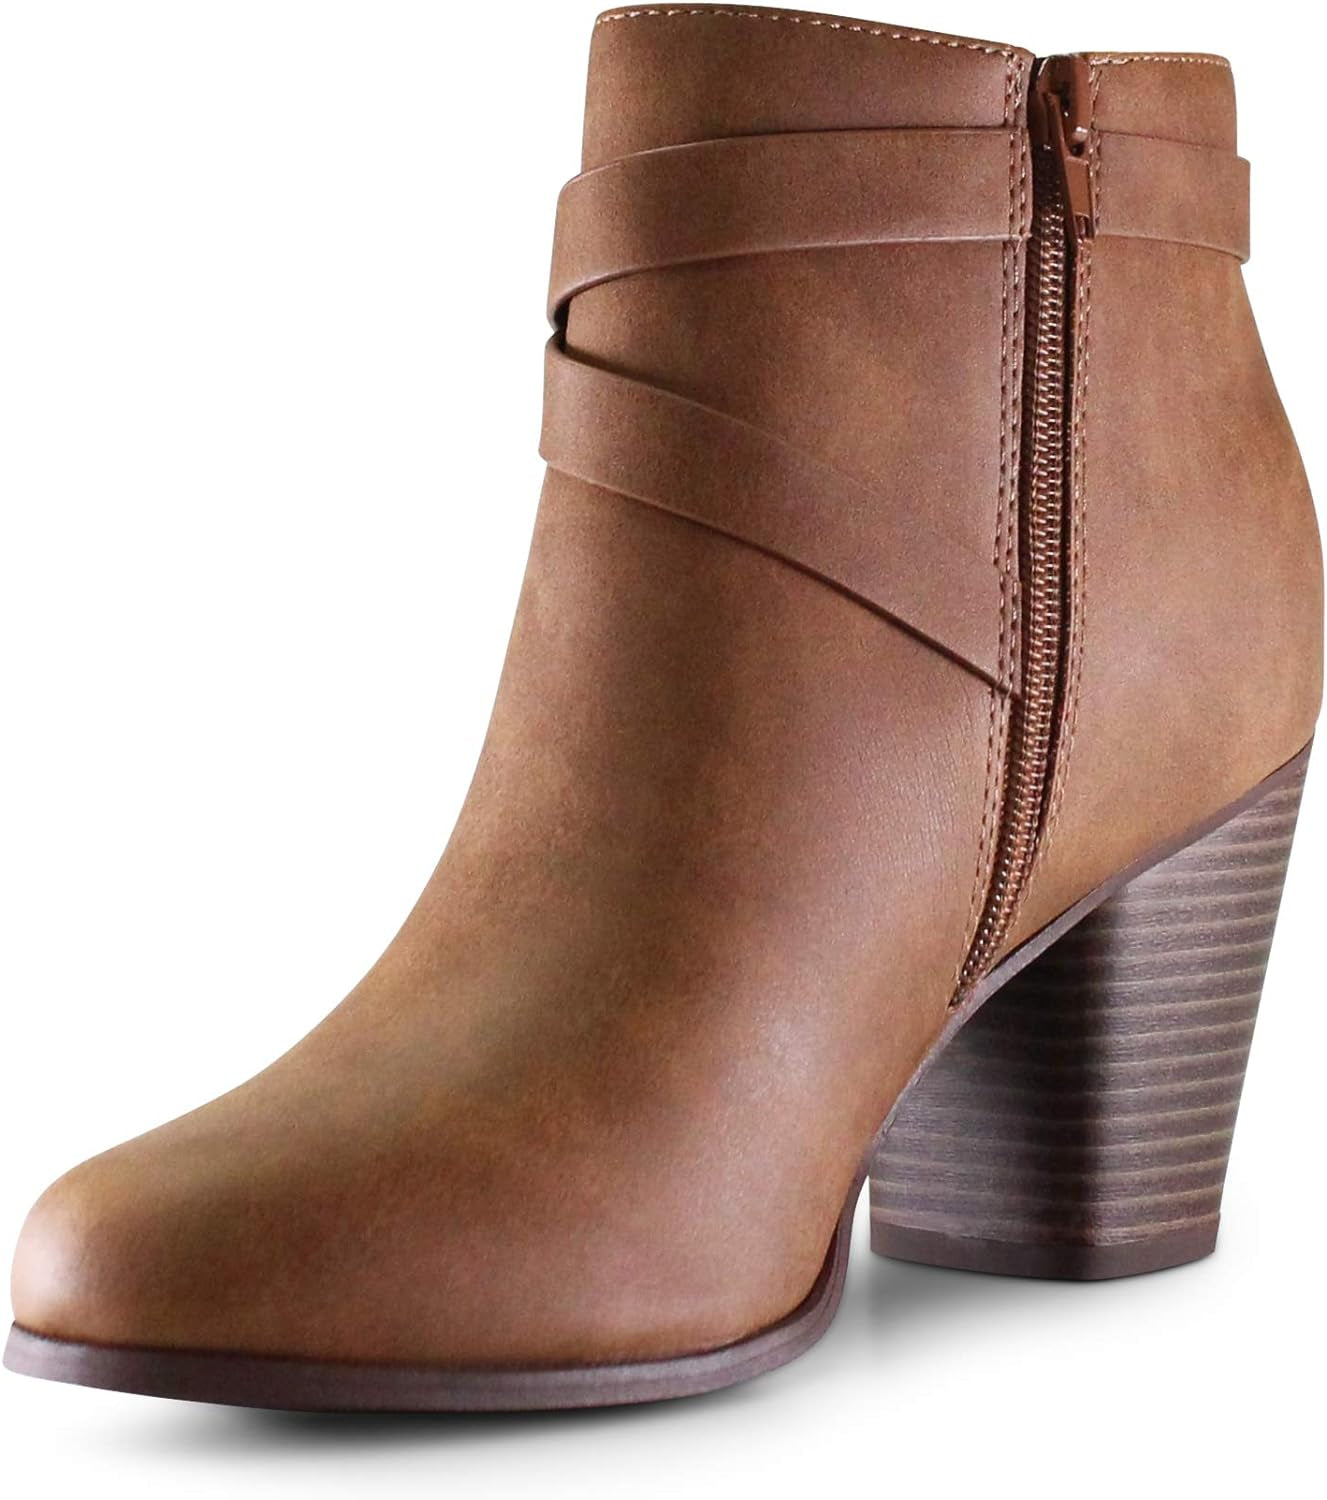 Marco Republic Montreal Women'S Almond Toe High Chunky Block Stacked Heels Ankle Booties Boots